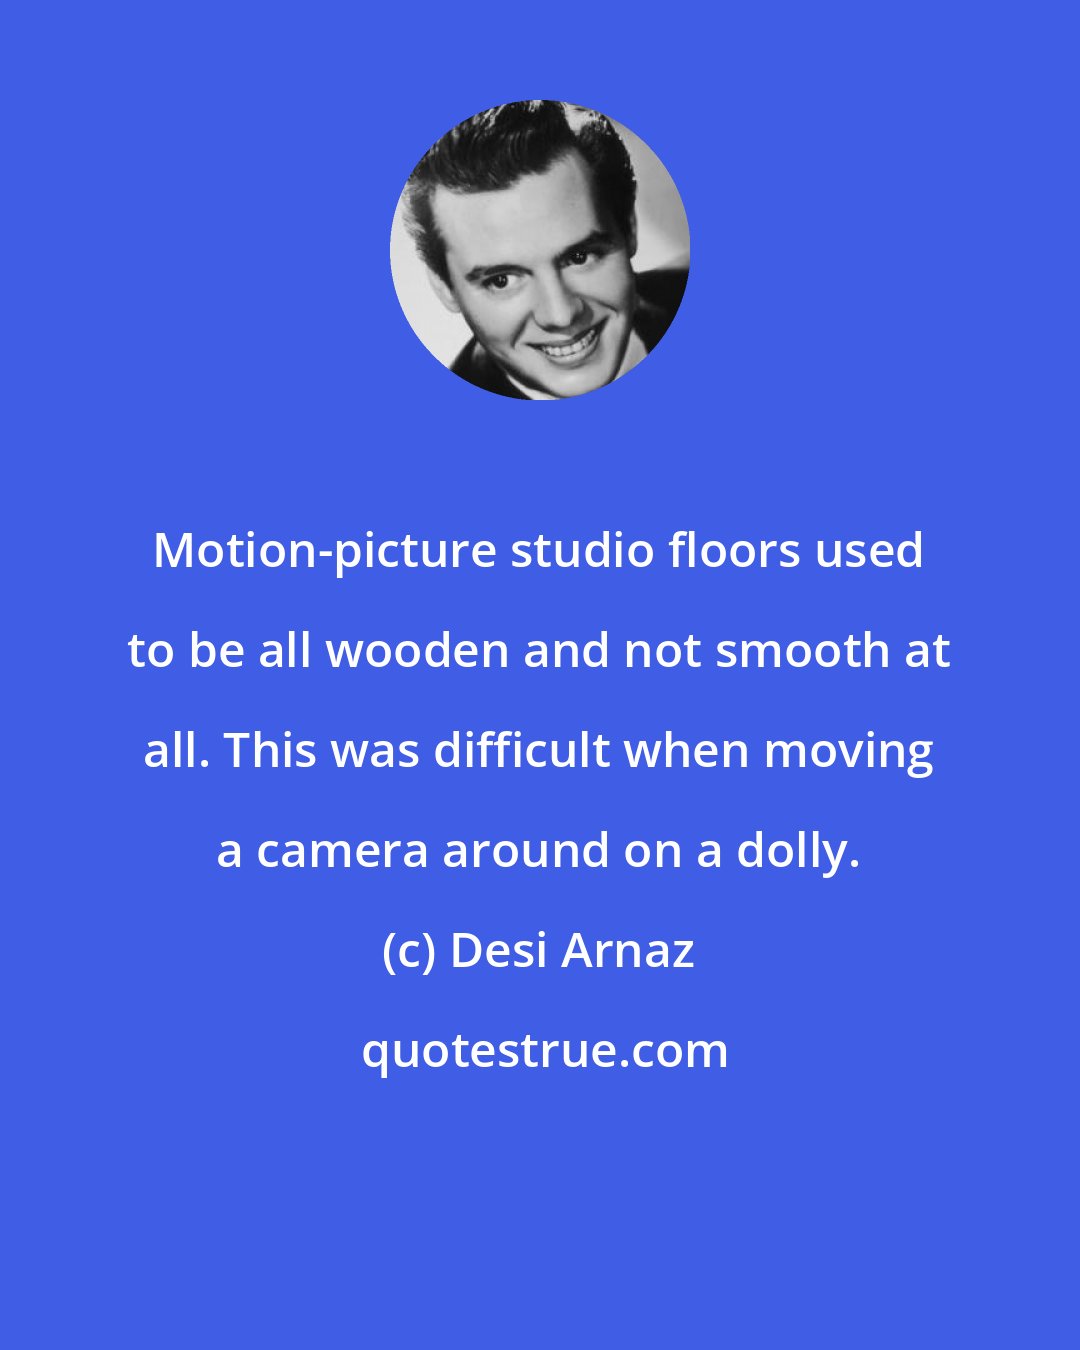 Desi Arnaz: Motion-picture studio floors used to be all wooden and not smooth at all. This was difficult when moving a camera around on a dolly.